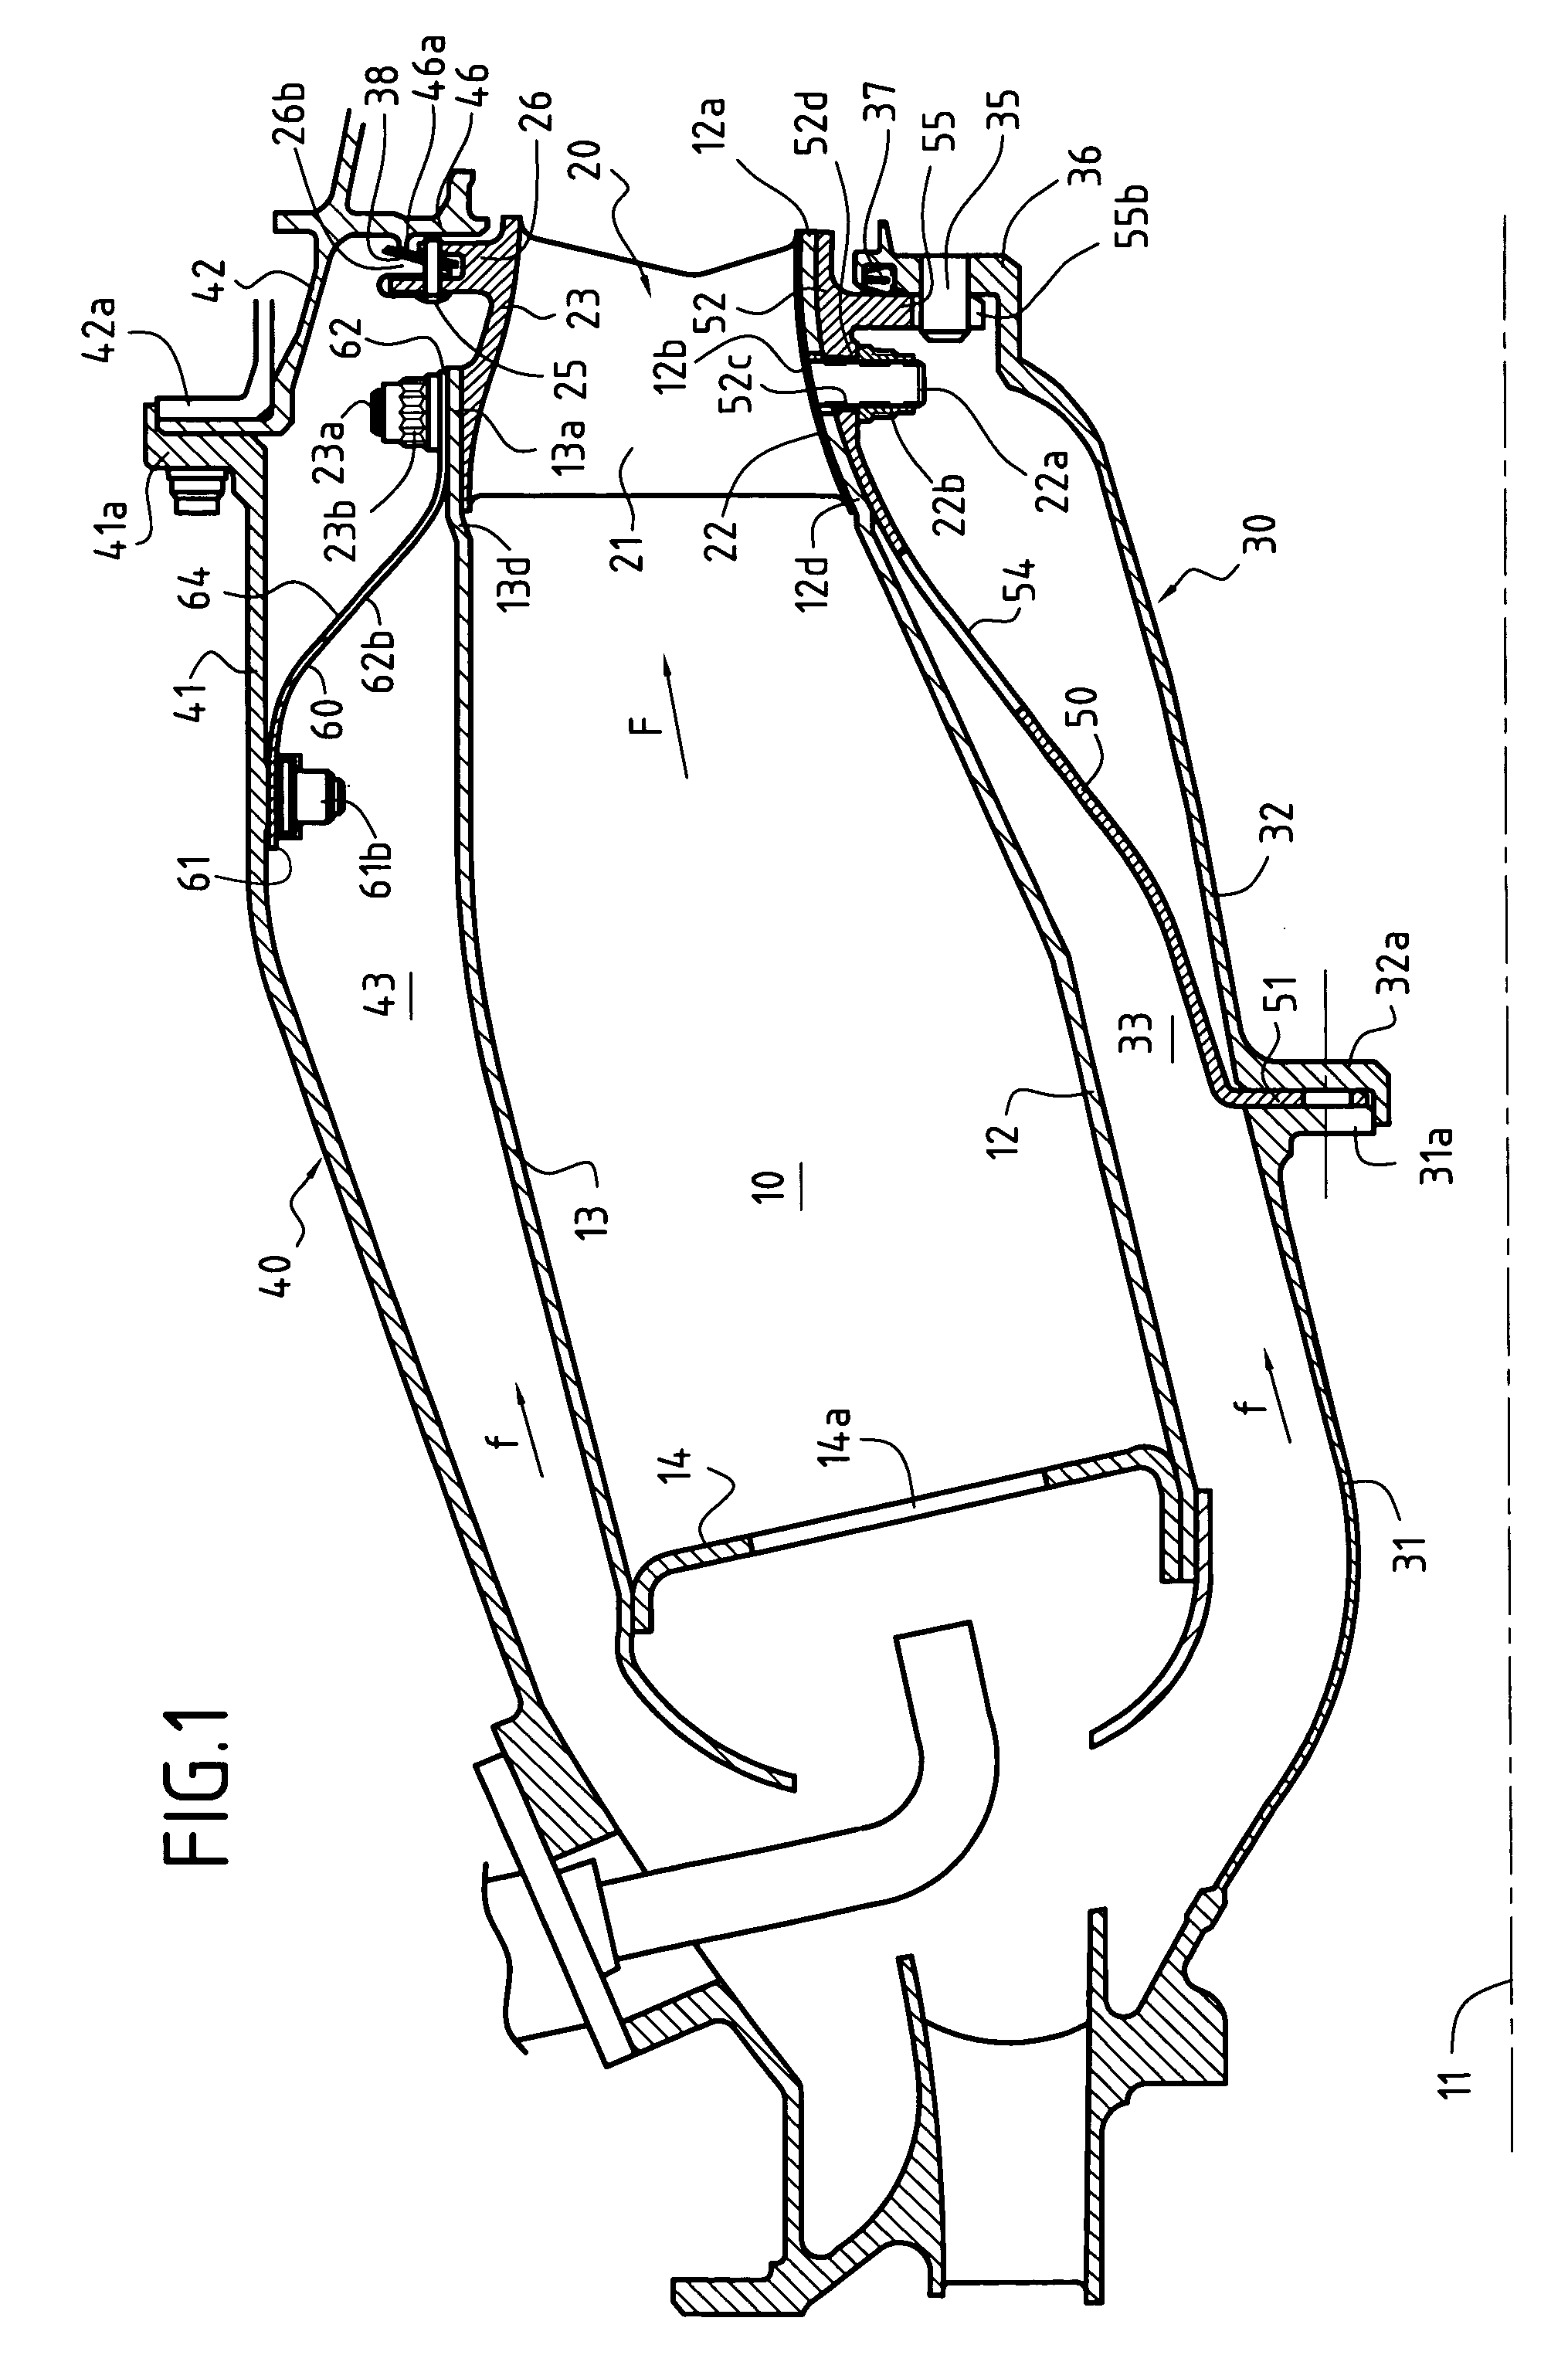 Assembly comprising a gas turbine combustion chamber integrated with a high pressure turbine nozzle